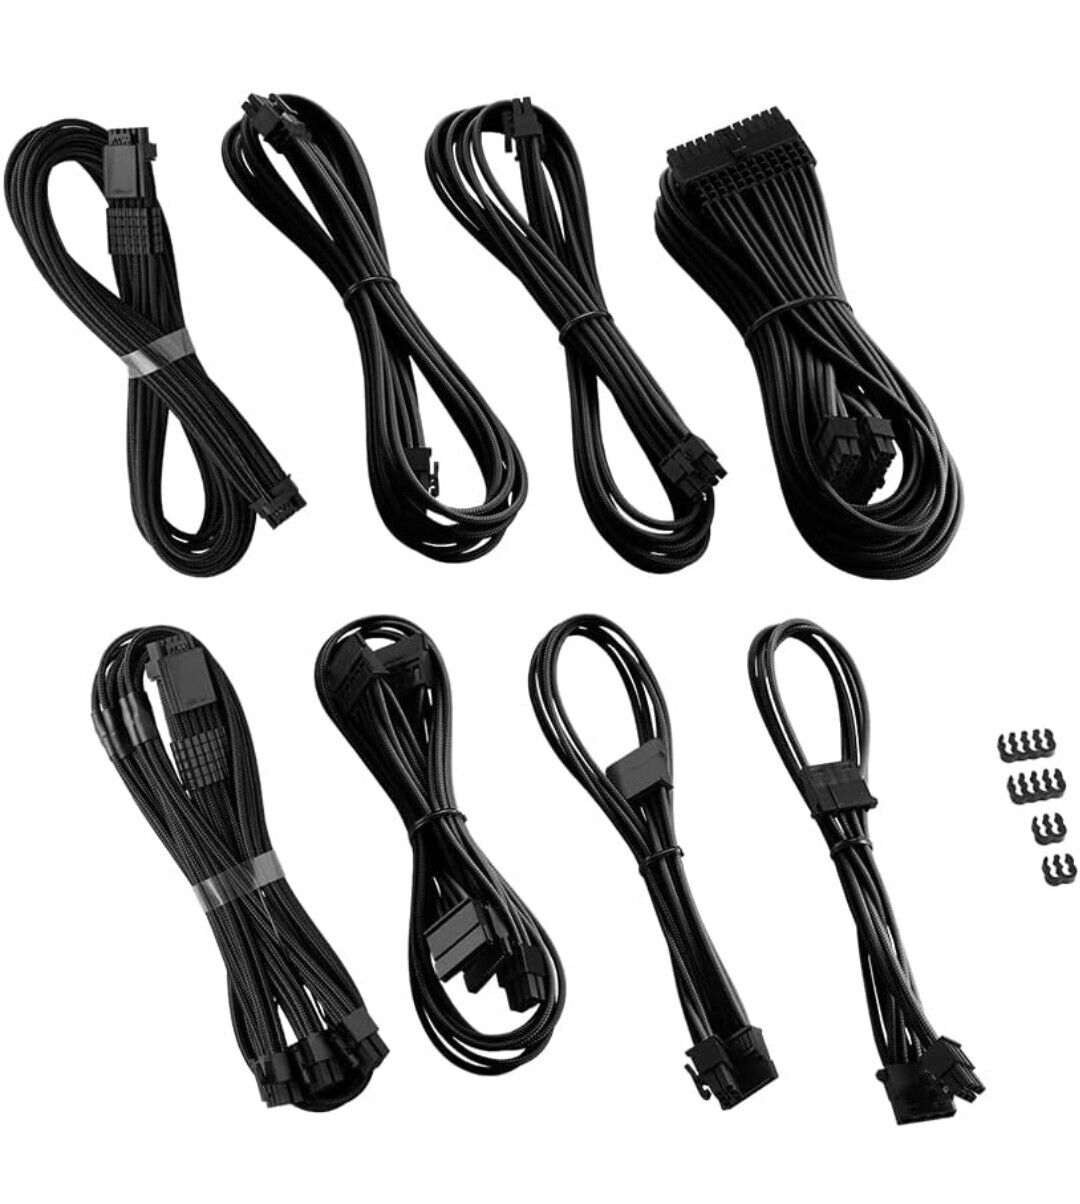 CableMod RT-Series Pro ModMesh Sleeved 12VHPWR StealthSense Dual Cable Kit